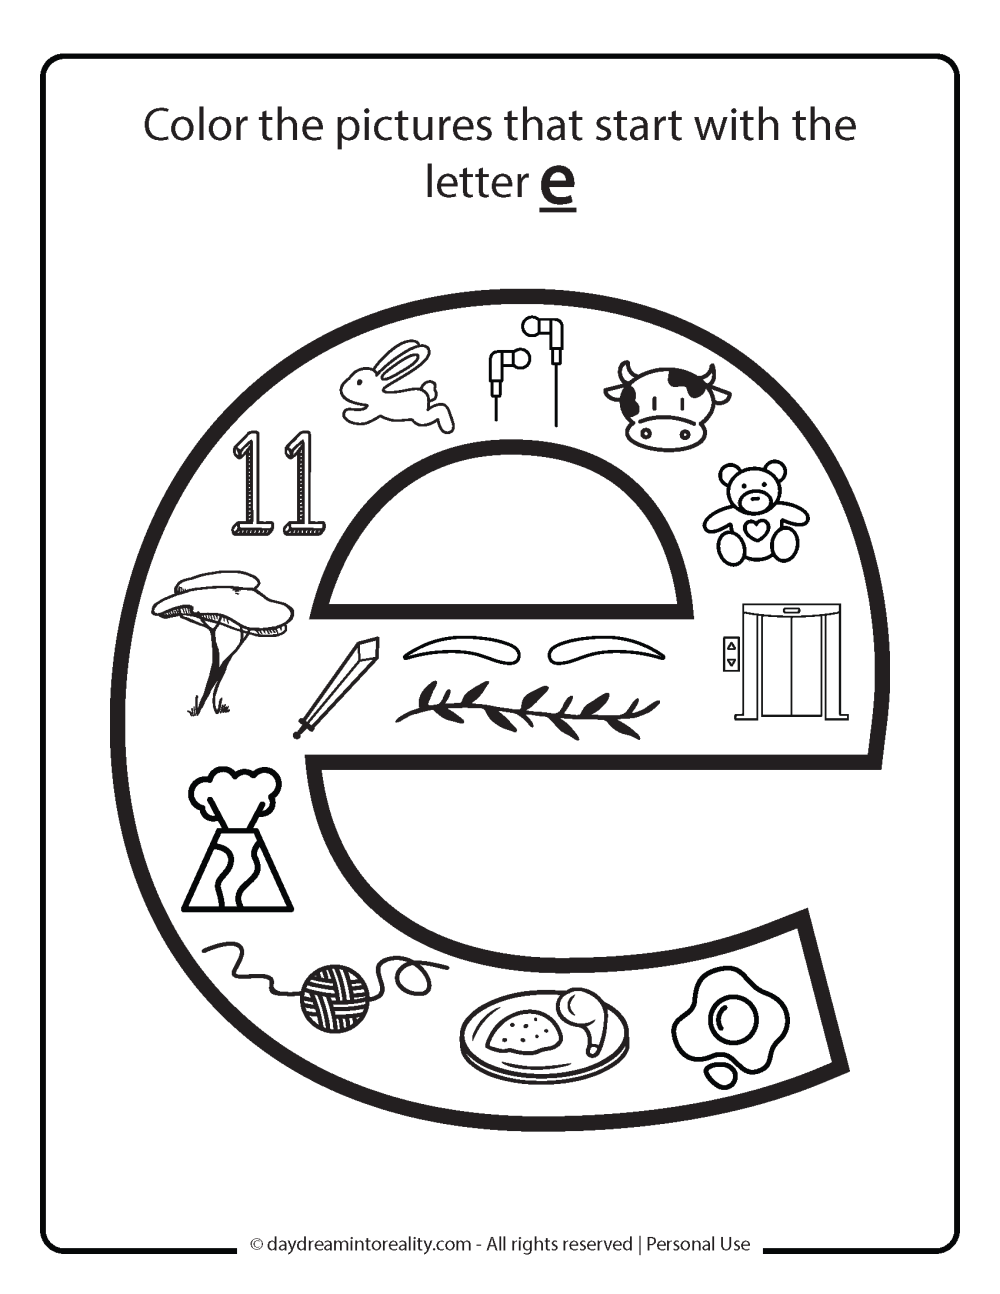 Letter E worksheet free printables - color picture that starts with E